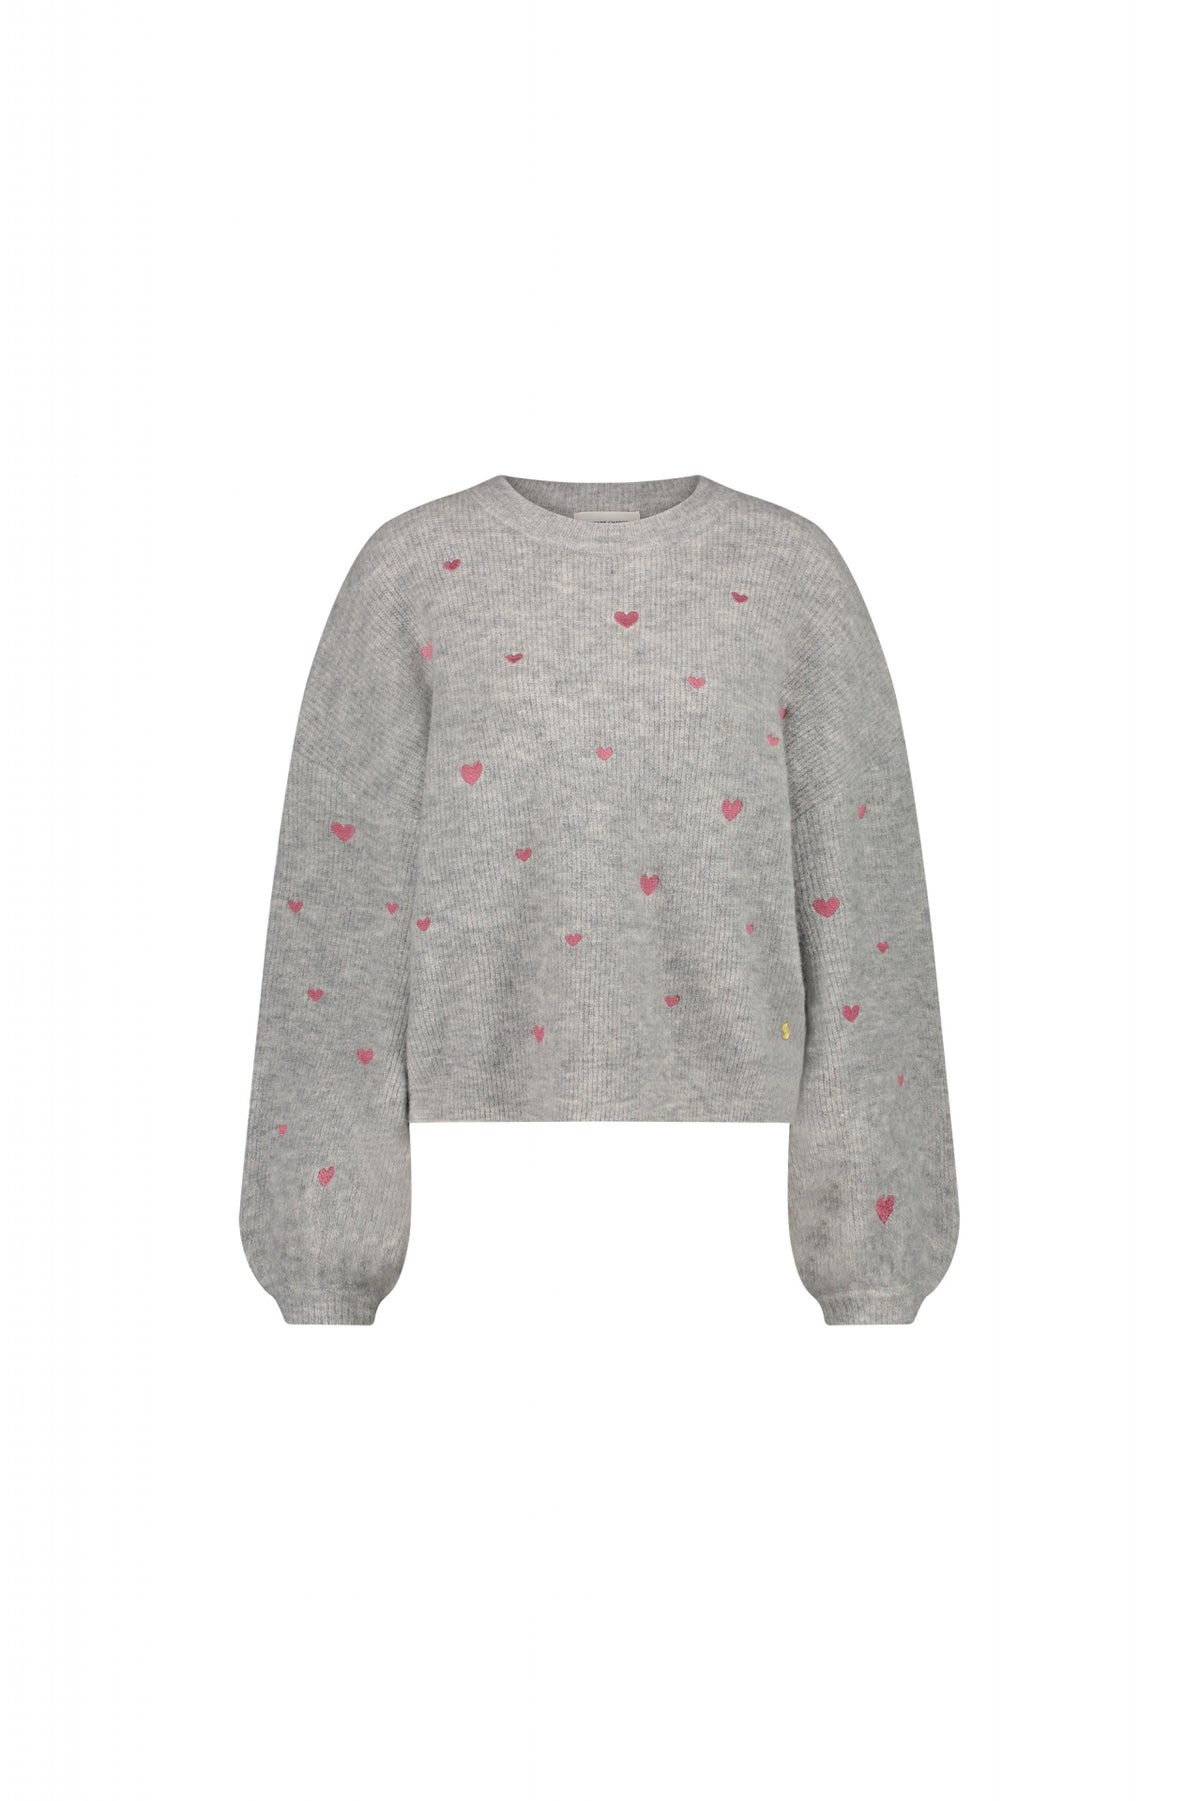 Grey crew neck jumper with balloon sleeves and pink embroidered hearts